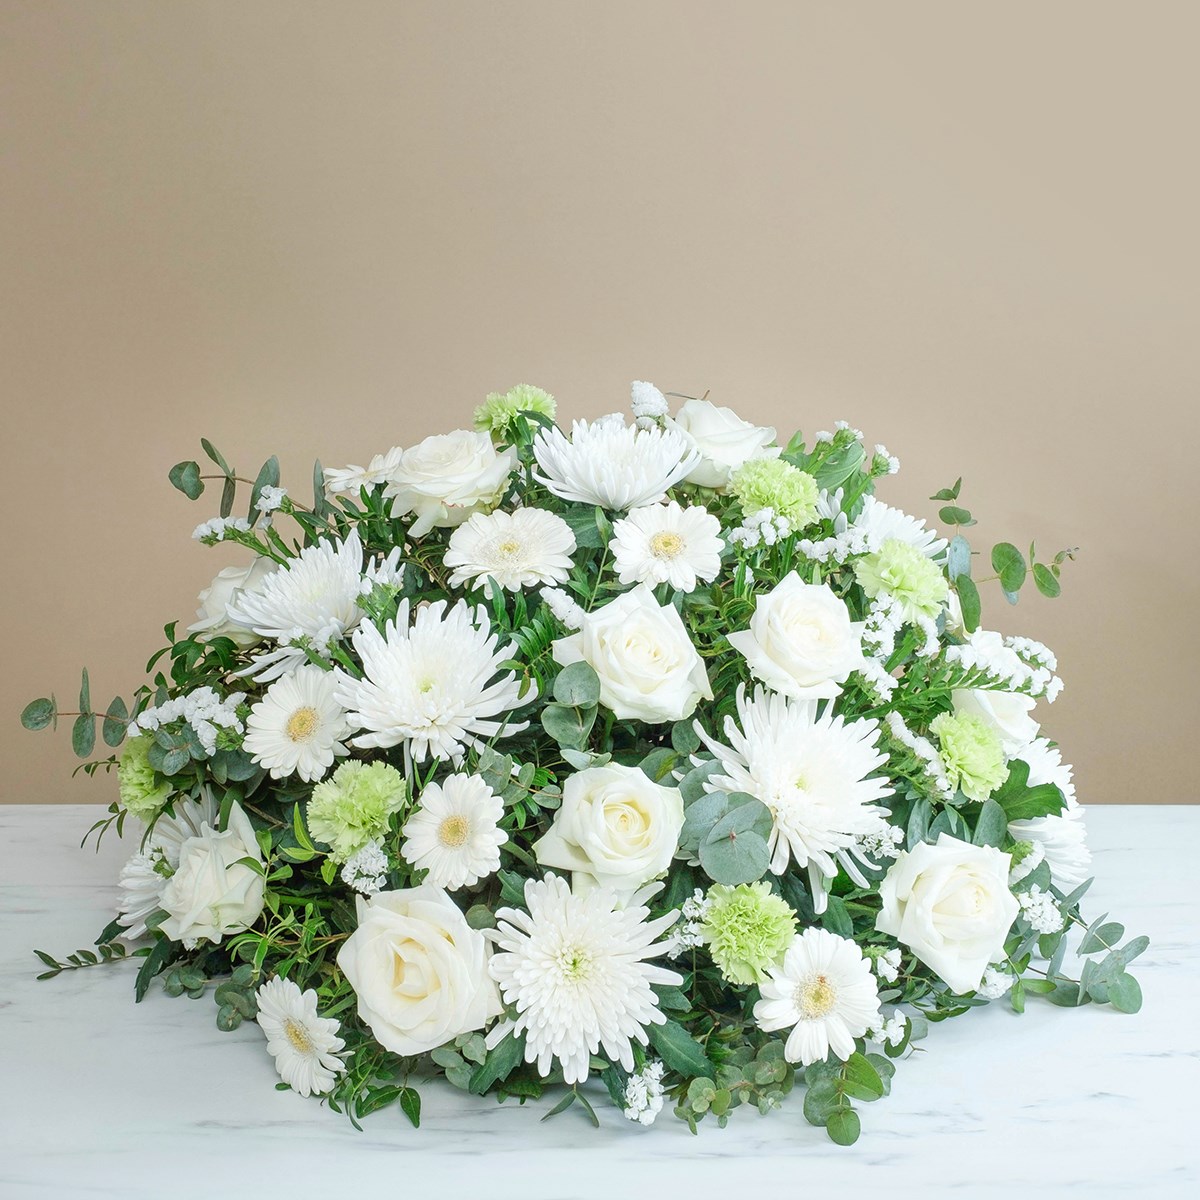 product image for Funeral centrepiece in white tones